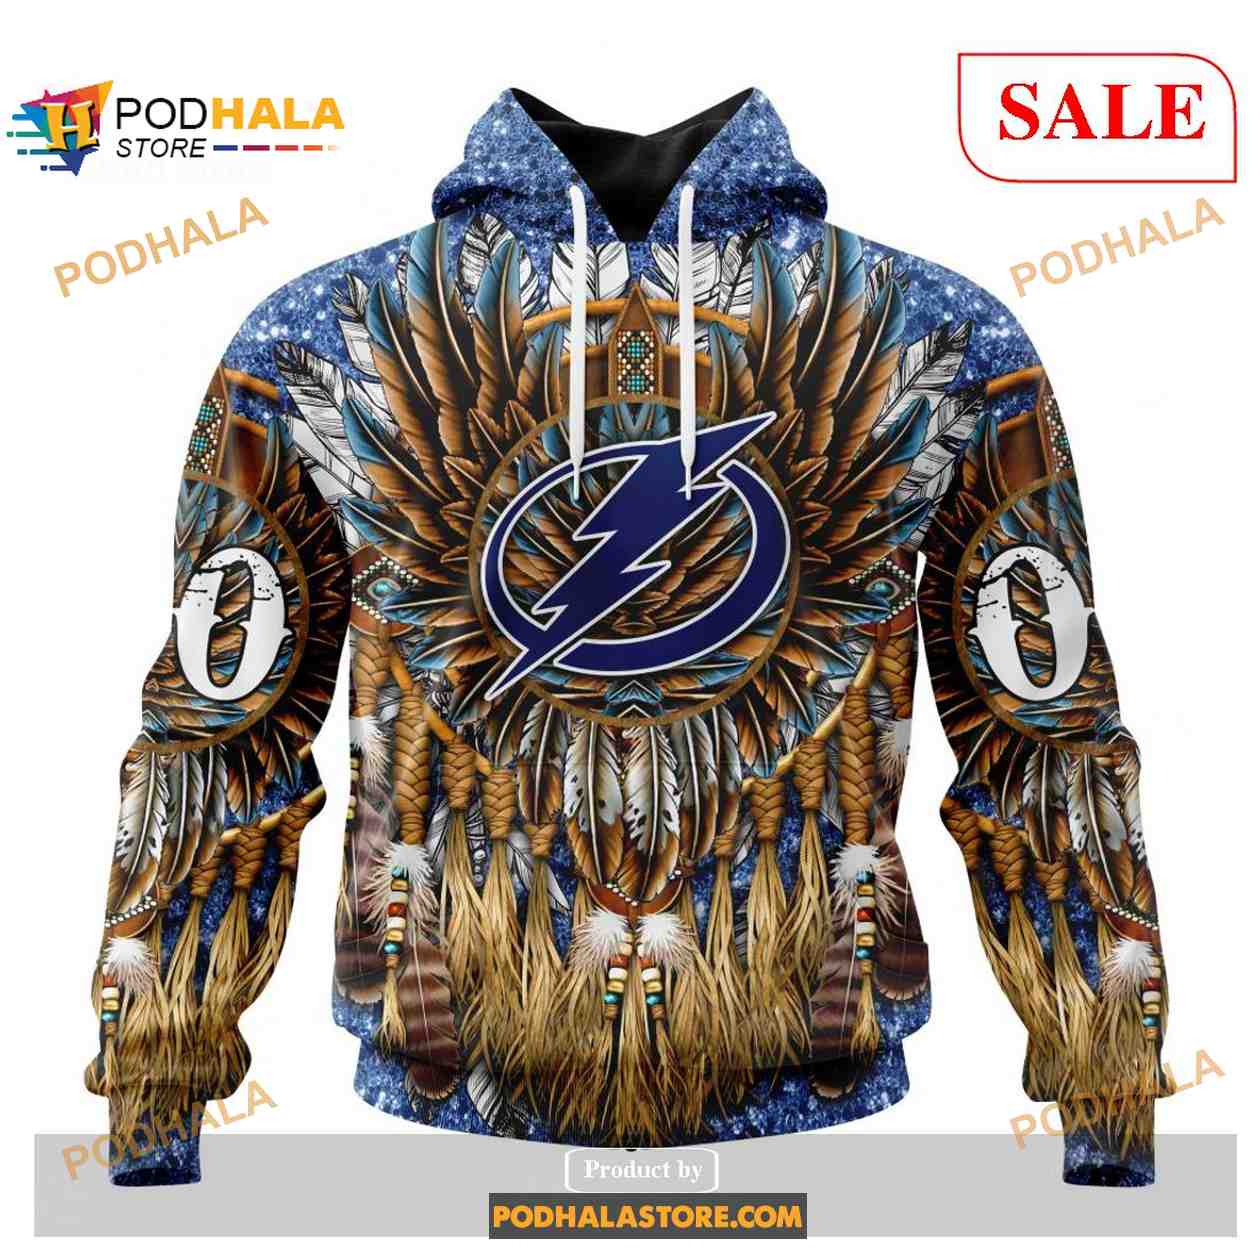 BEST NHL Tampa Bay Lightning Gasparilla Personalized All Over